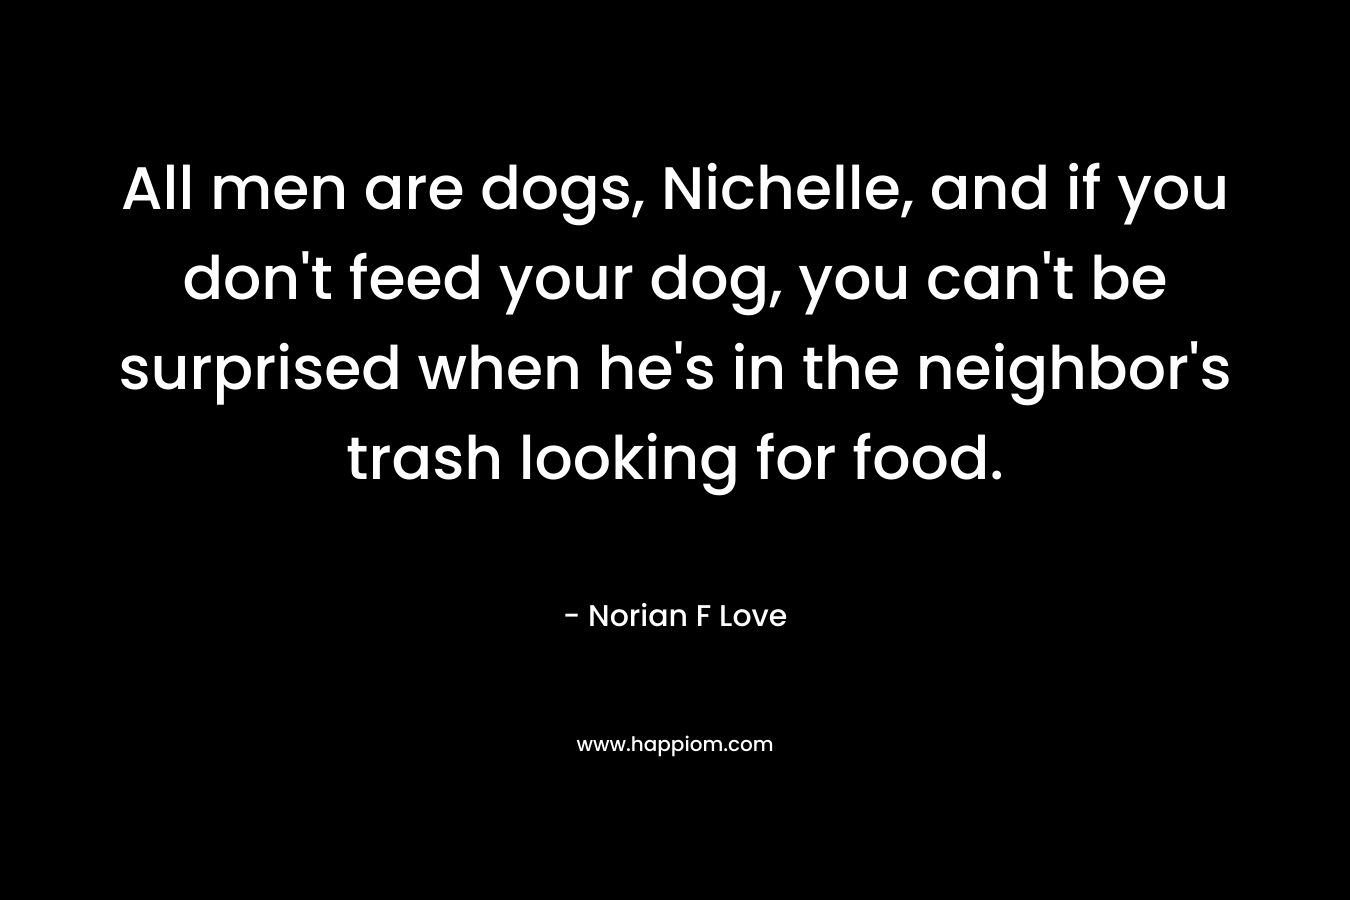 All men are dogs, Nichelle, and if you don’t feed your dog, you can’t be surprised when he’s in the neighbor’s trash looking for food. – Norian F Love